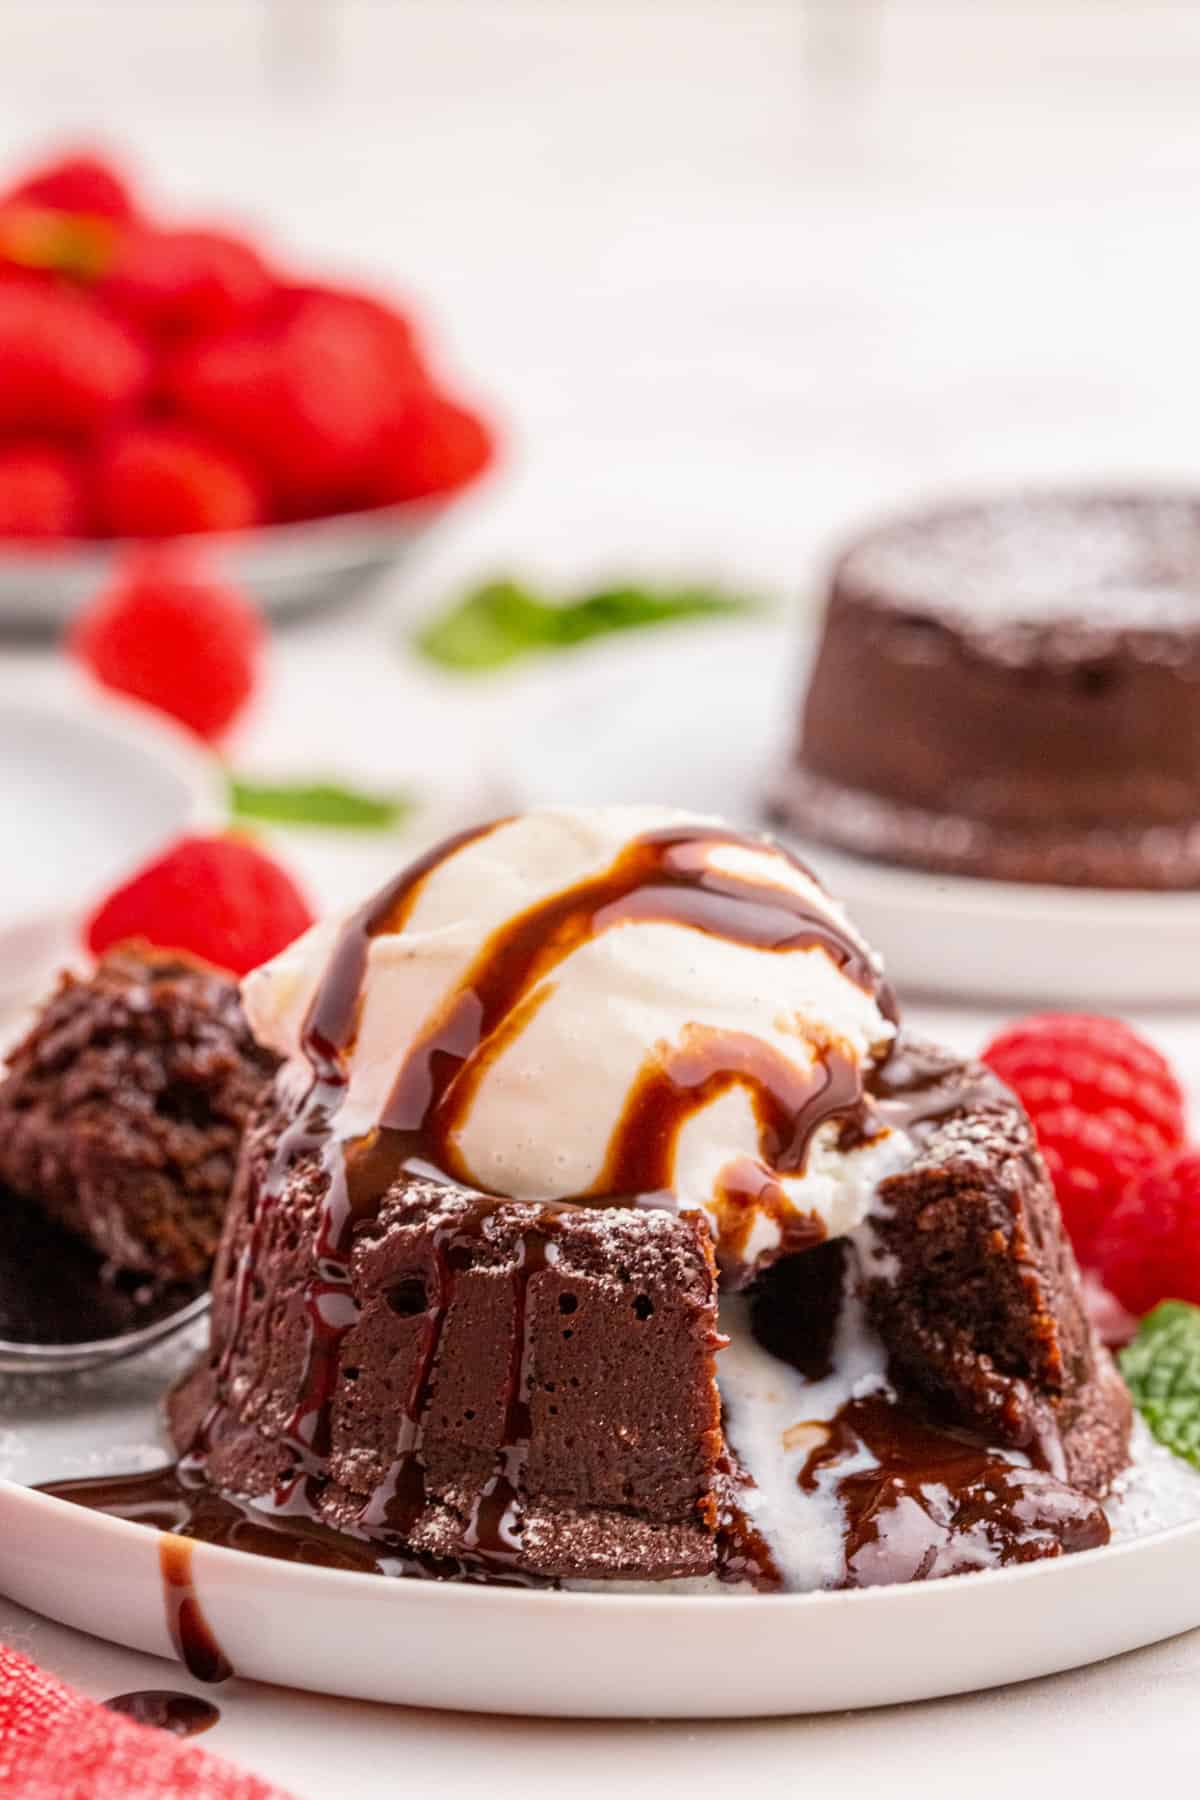 Chocolate Lava Cake topped with ice cream and chocolate syrup